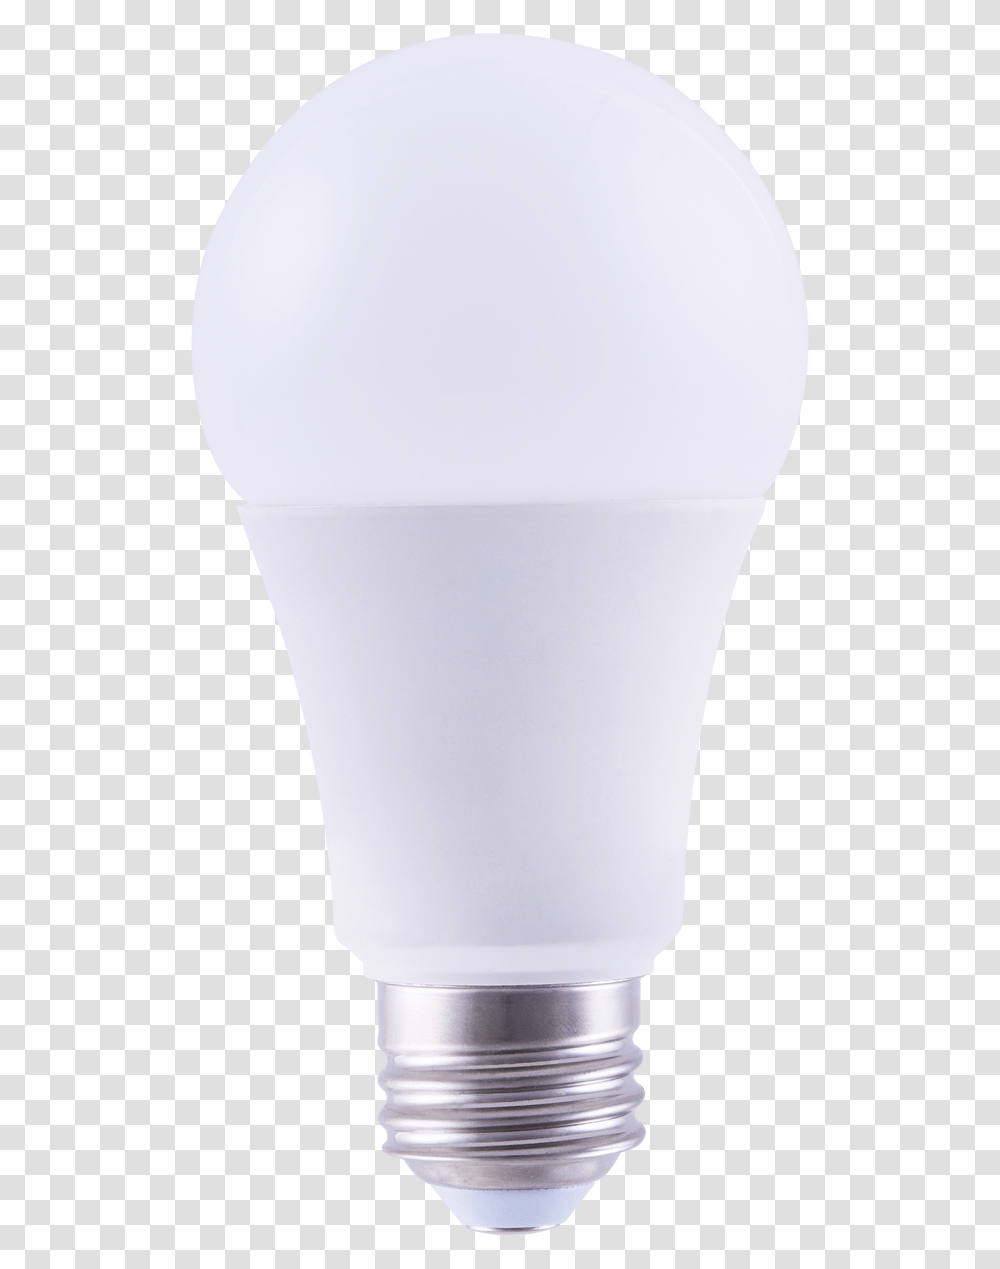 Compact Fluorescent Lamp, Coffee Cup, Balloon, Porcelain Transparent Png